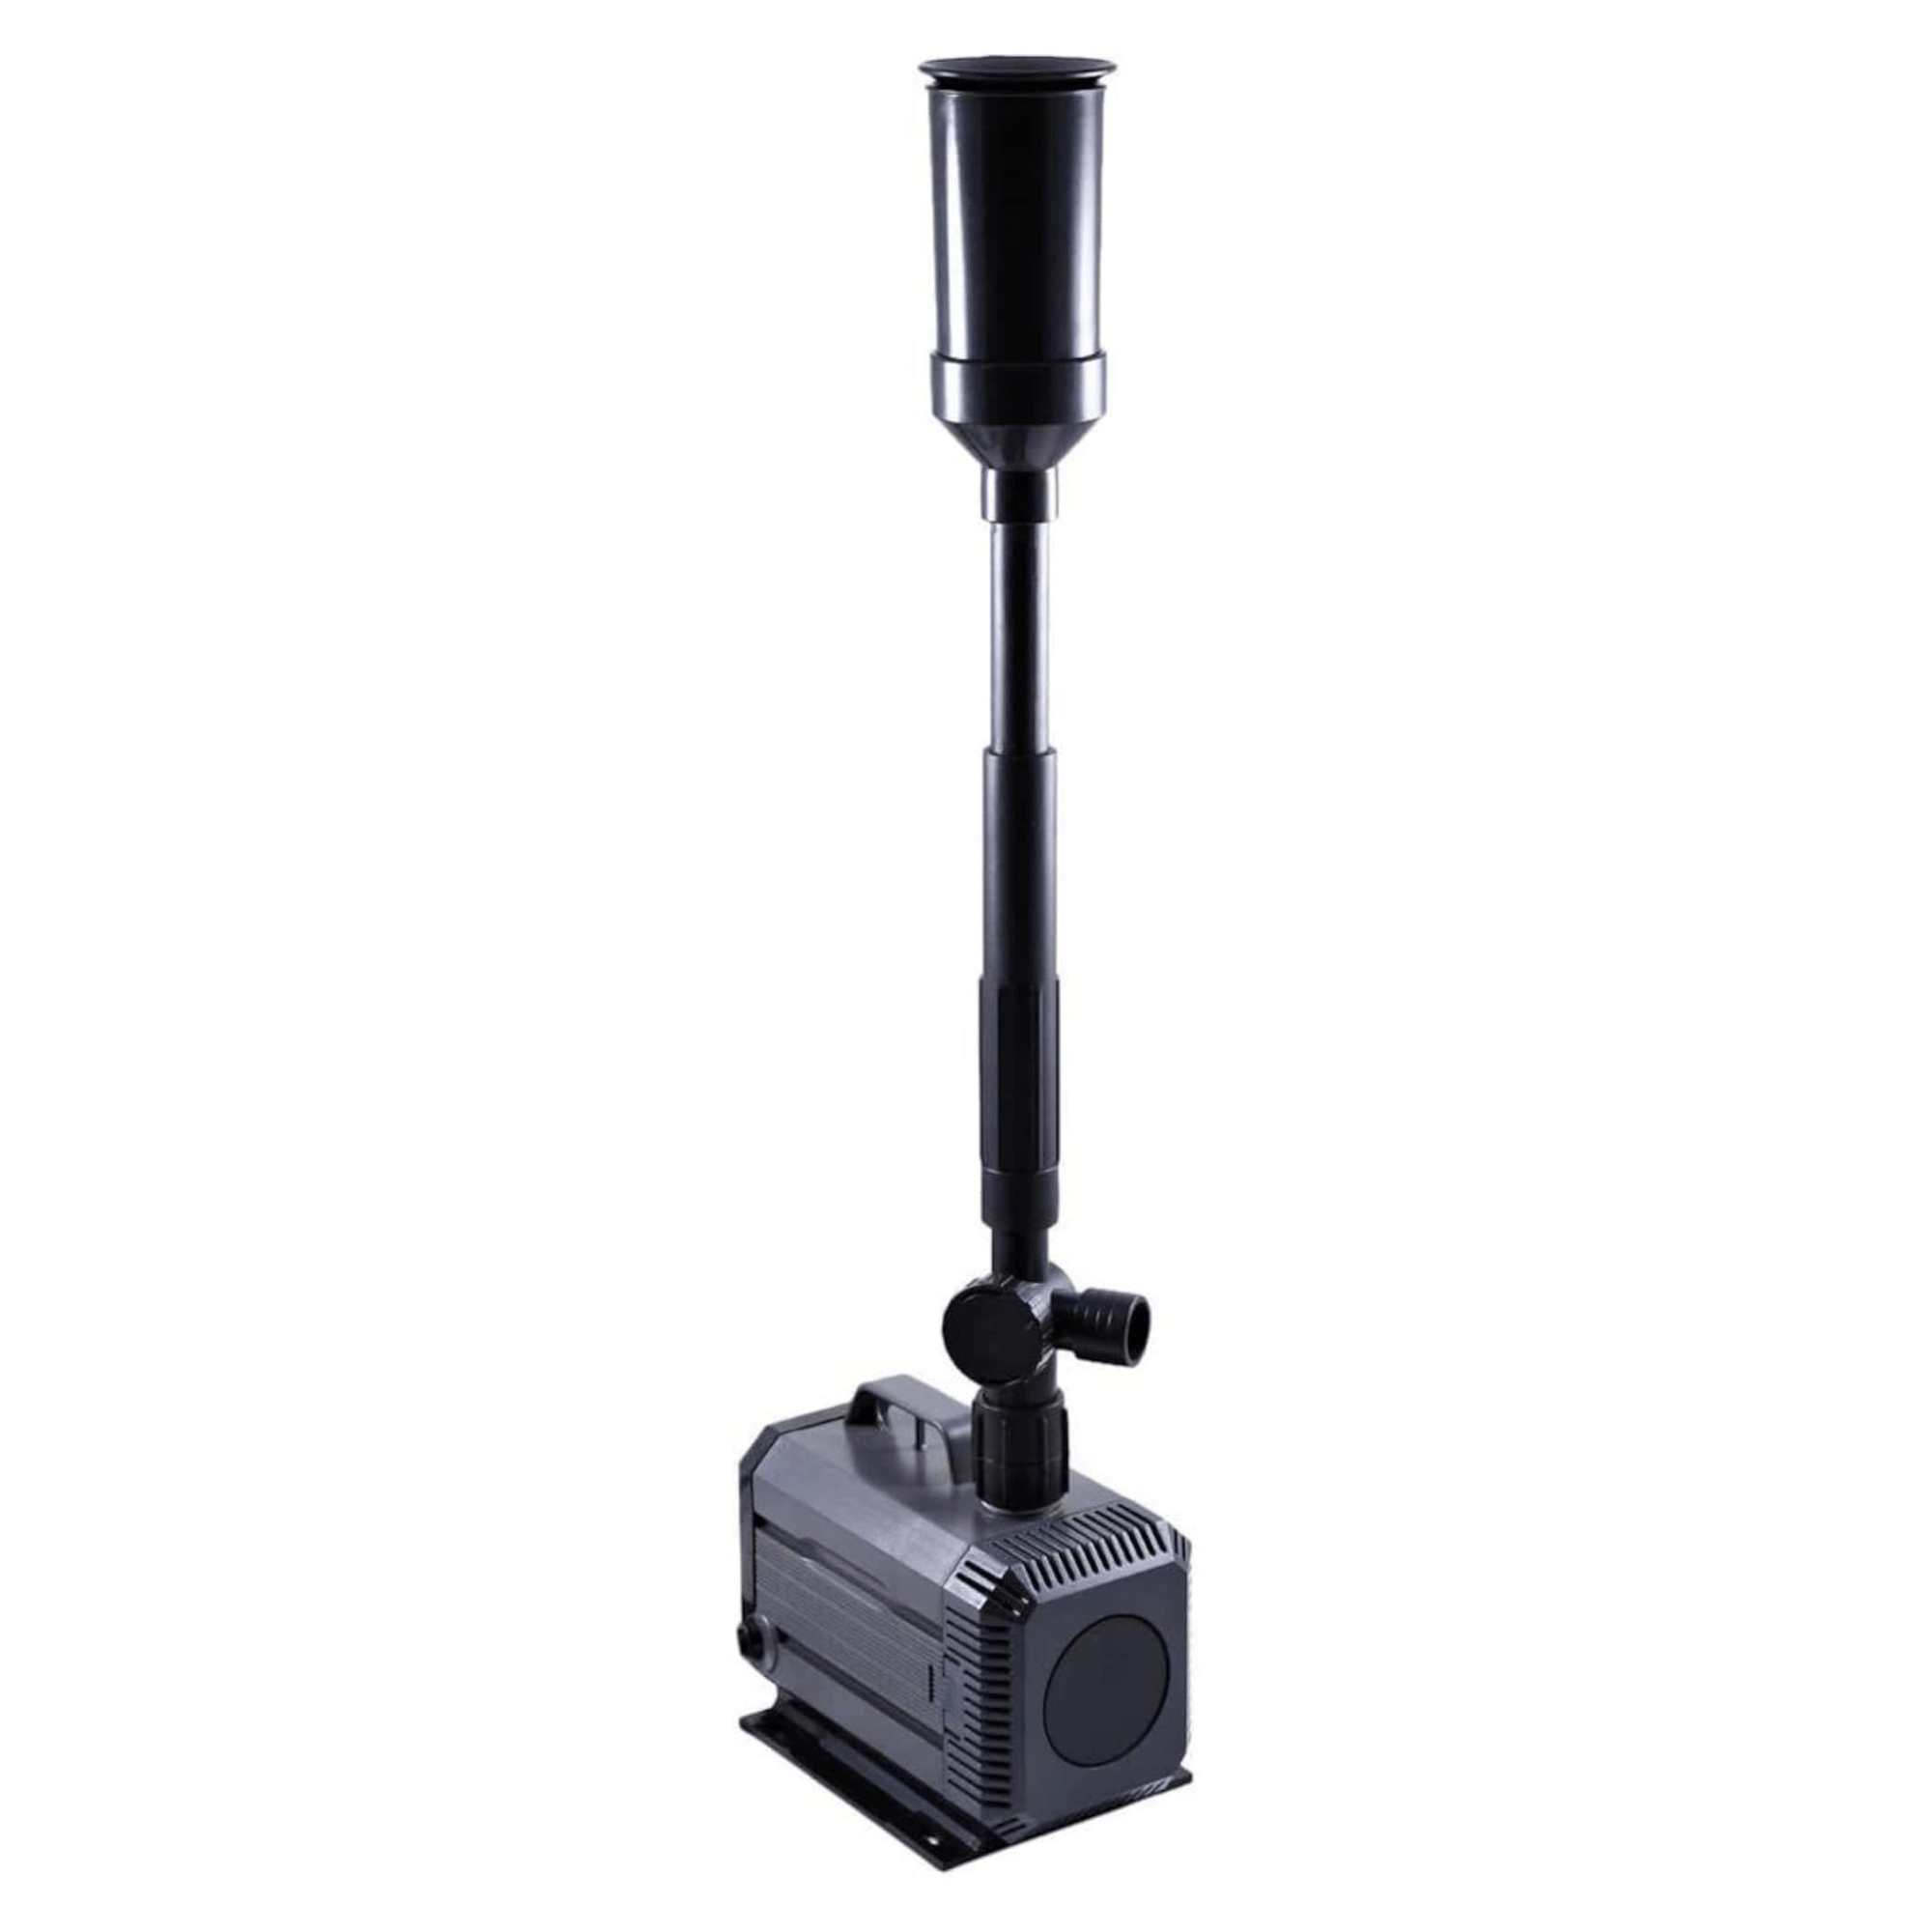 LuckyPro Fountain Pump - Enhance Your Outdoor Space | 55W, 100W, 150W | Supply Master, Accra, Ghana Pump Control Buy Tools hardware Building materials